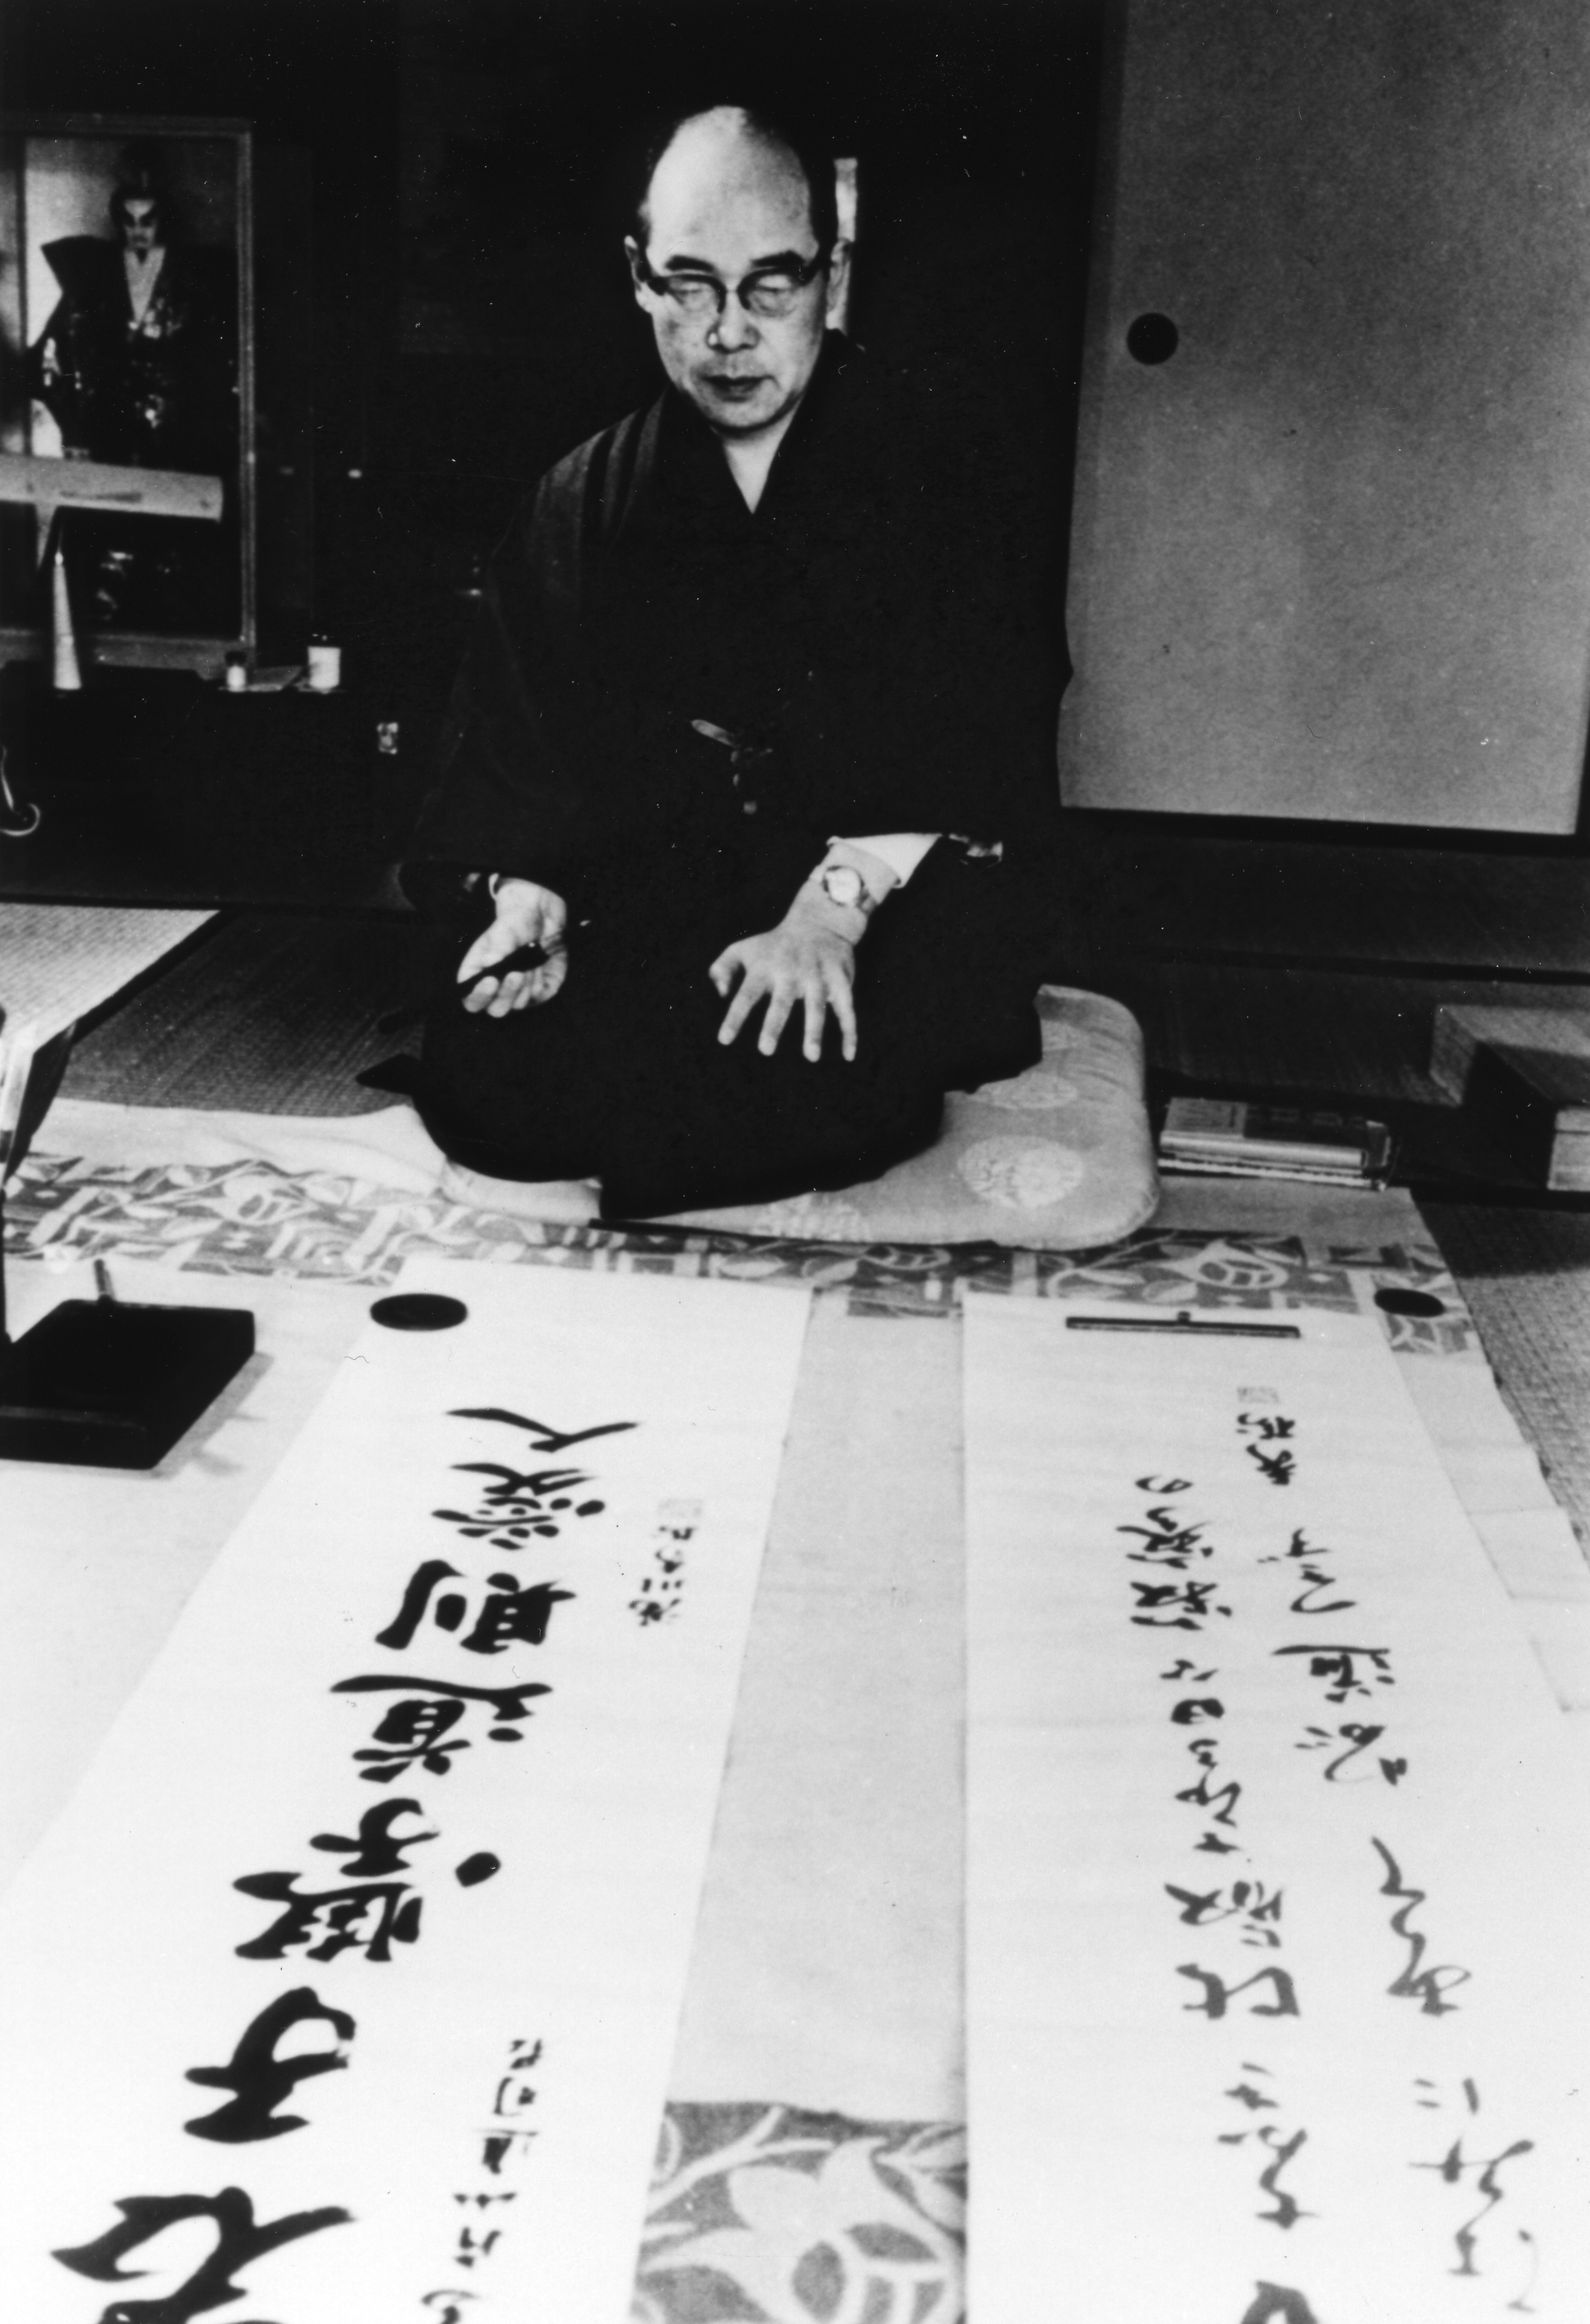 Hideki Yukawa sits on the floor with a brush in hand and pieces of calligraphy on the floor